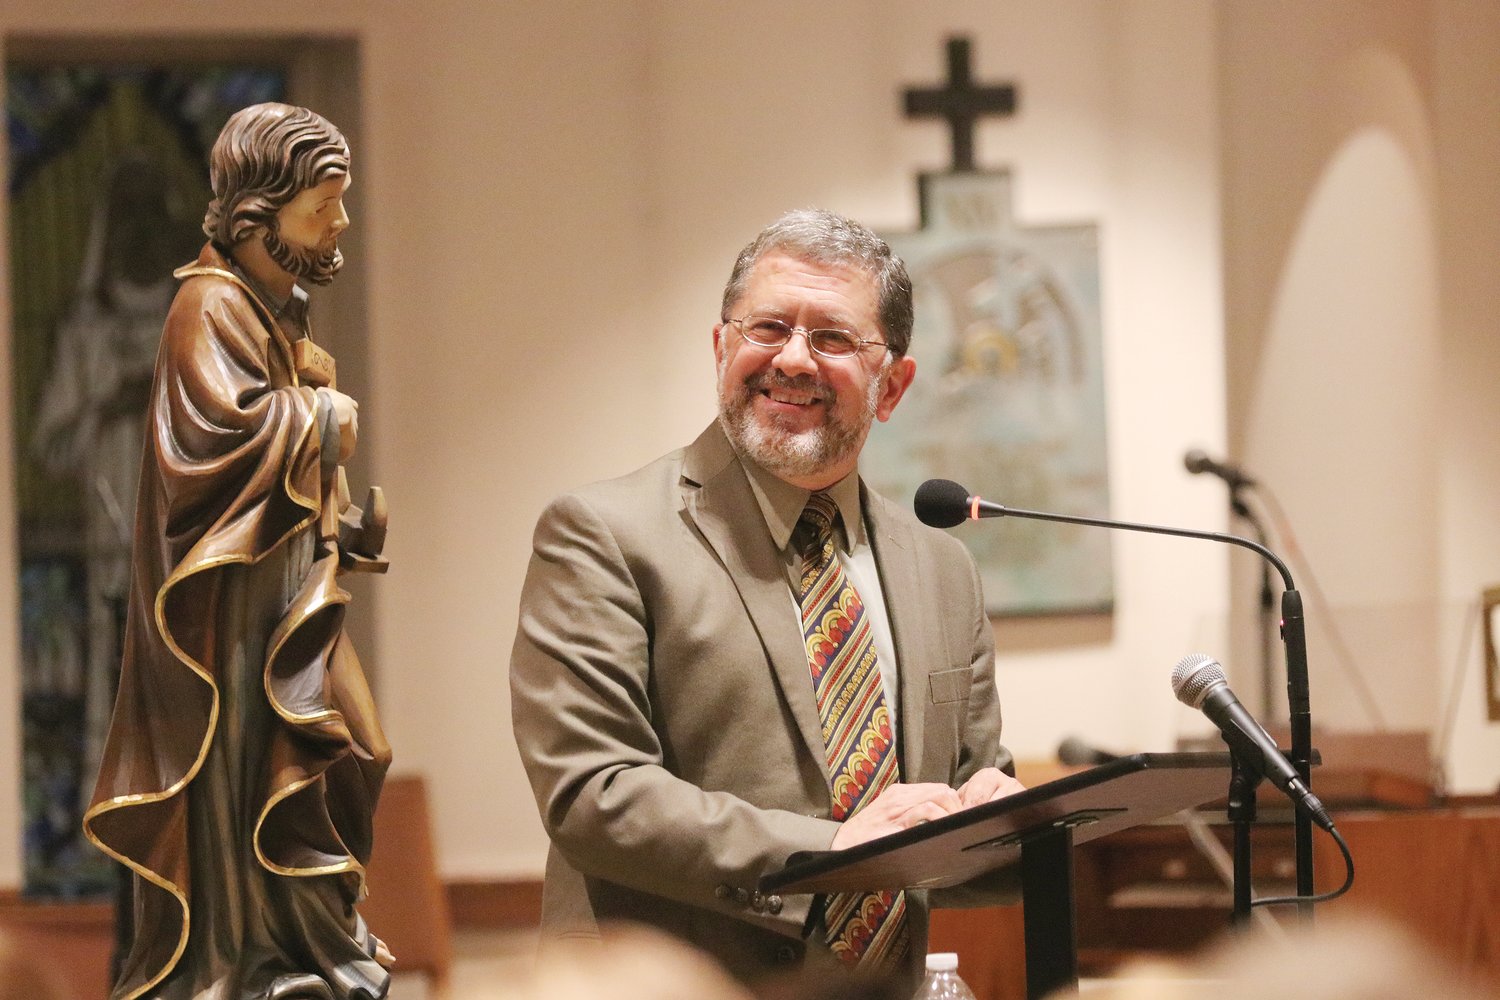 Mike Aquilina, popular author of works on Catholic Church history speaks on “St. Joseph and His Work: The Life of St. Joseph” at St. Philip Church on Sept. 21.